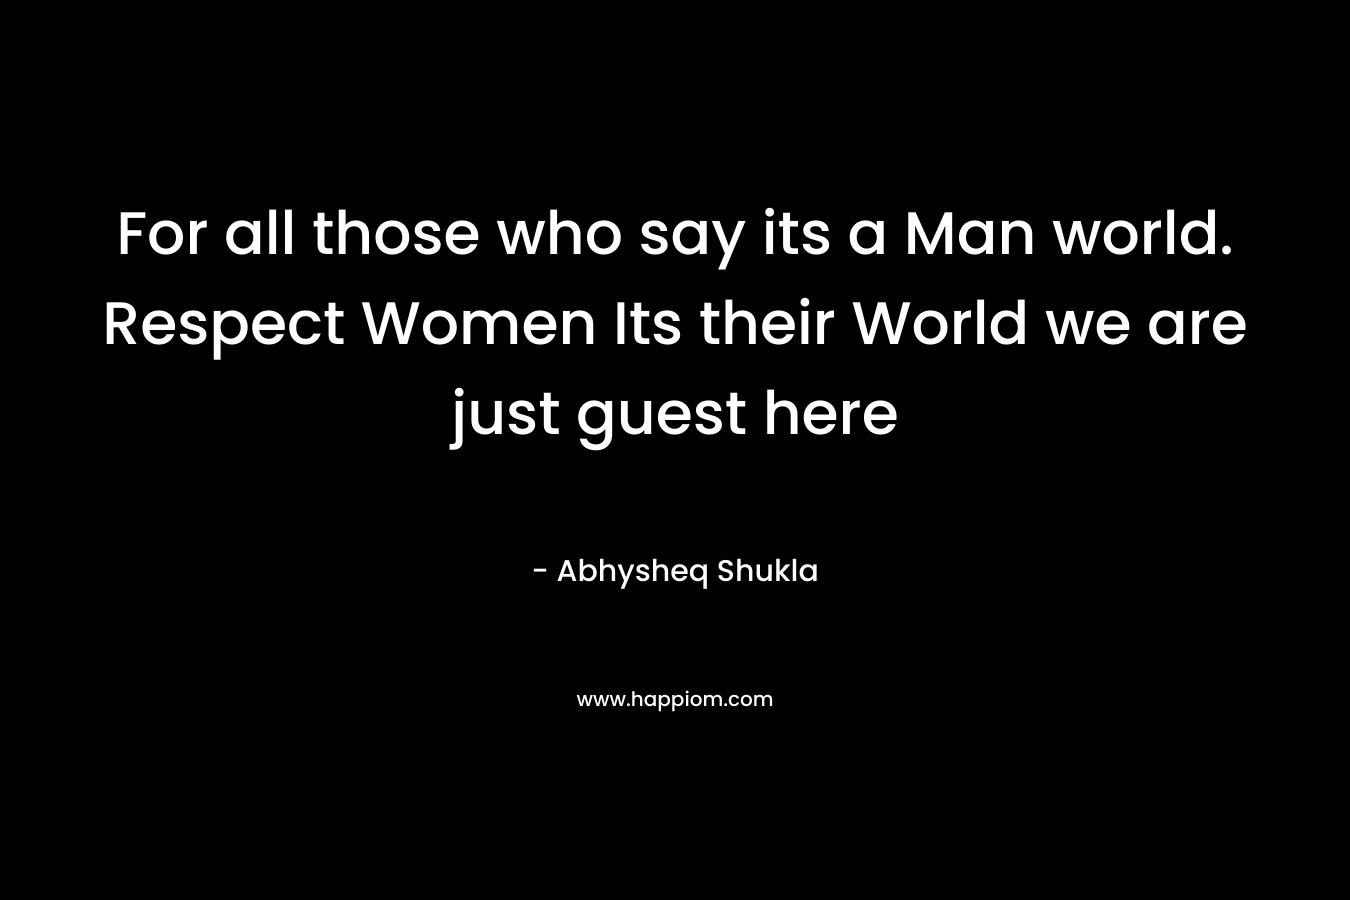 For all those who say its a Man world. Respect Women Its their World we are just guest here